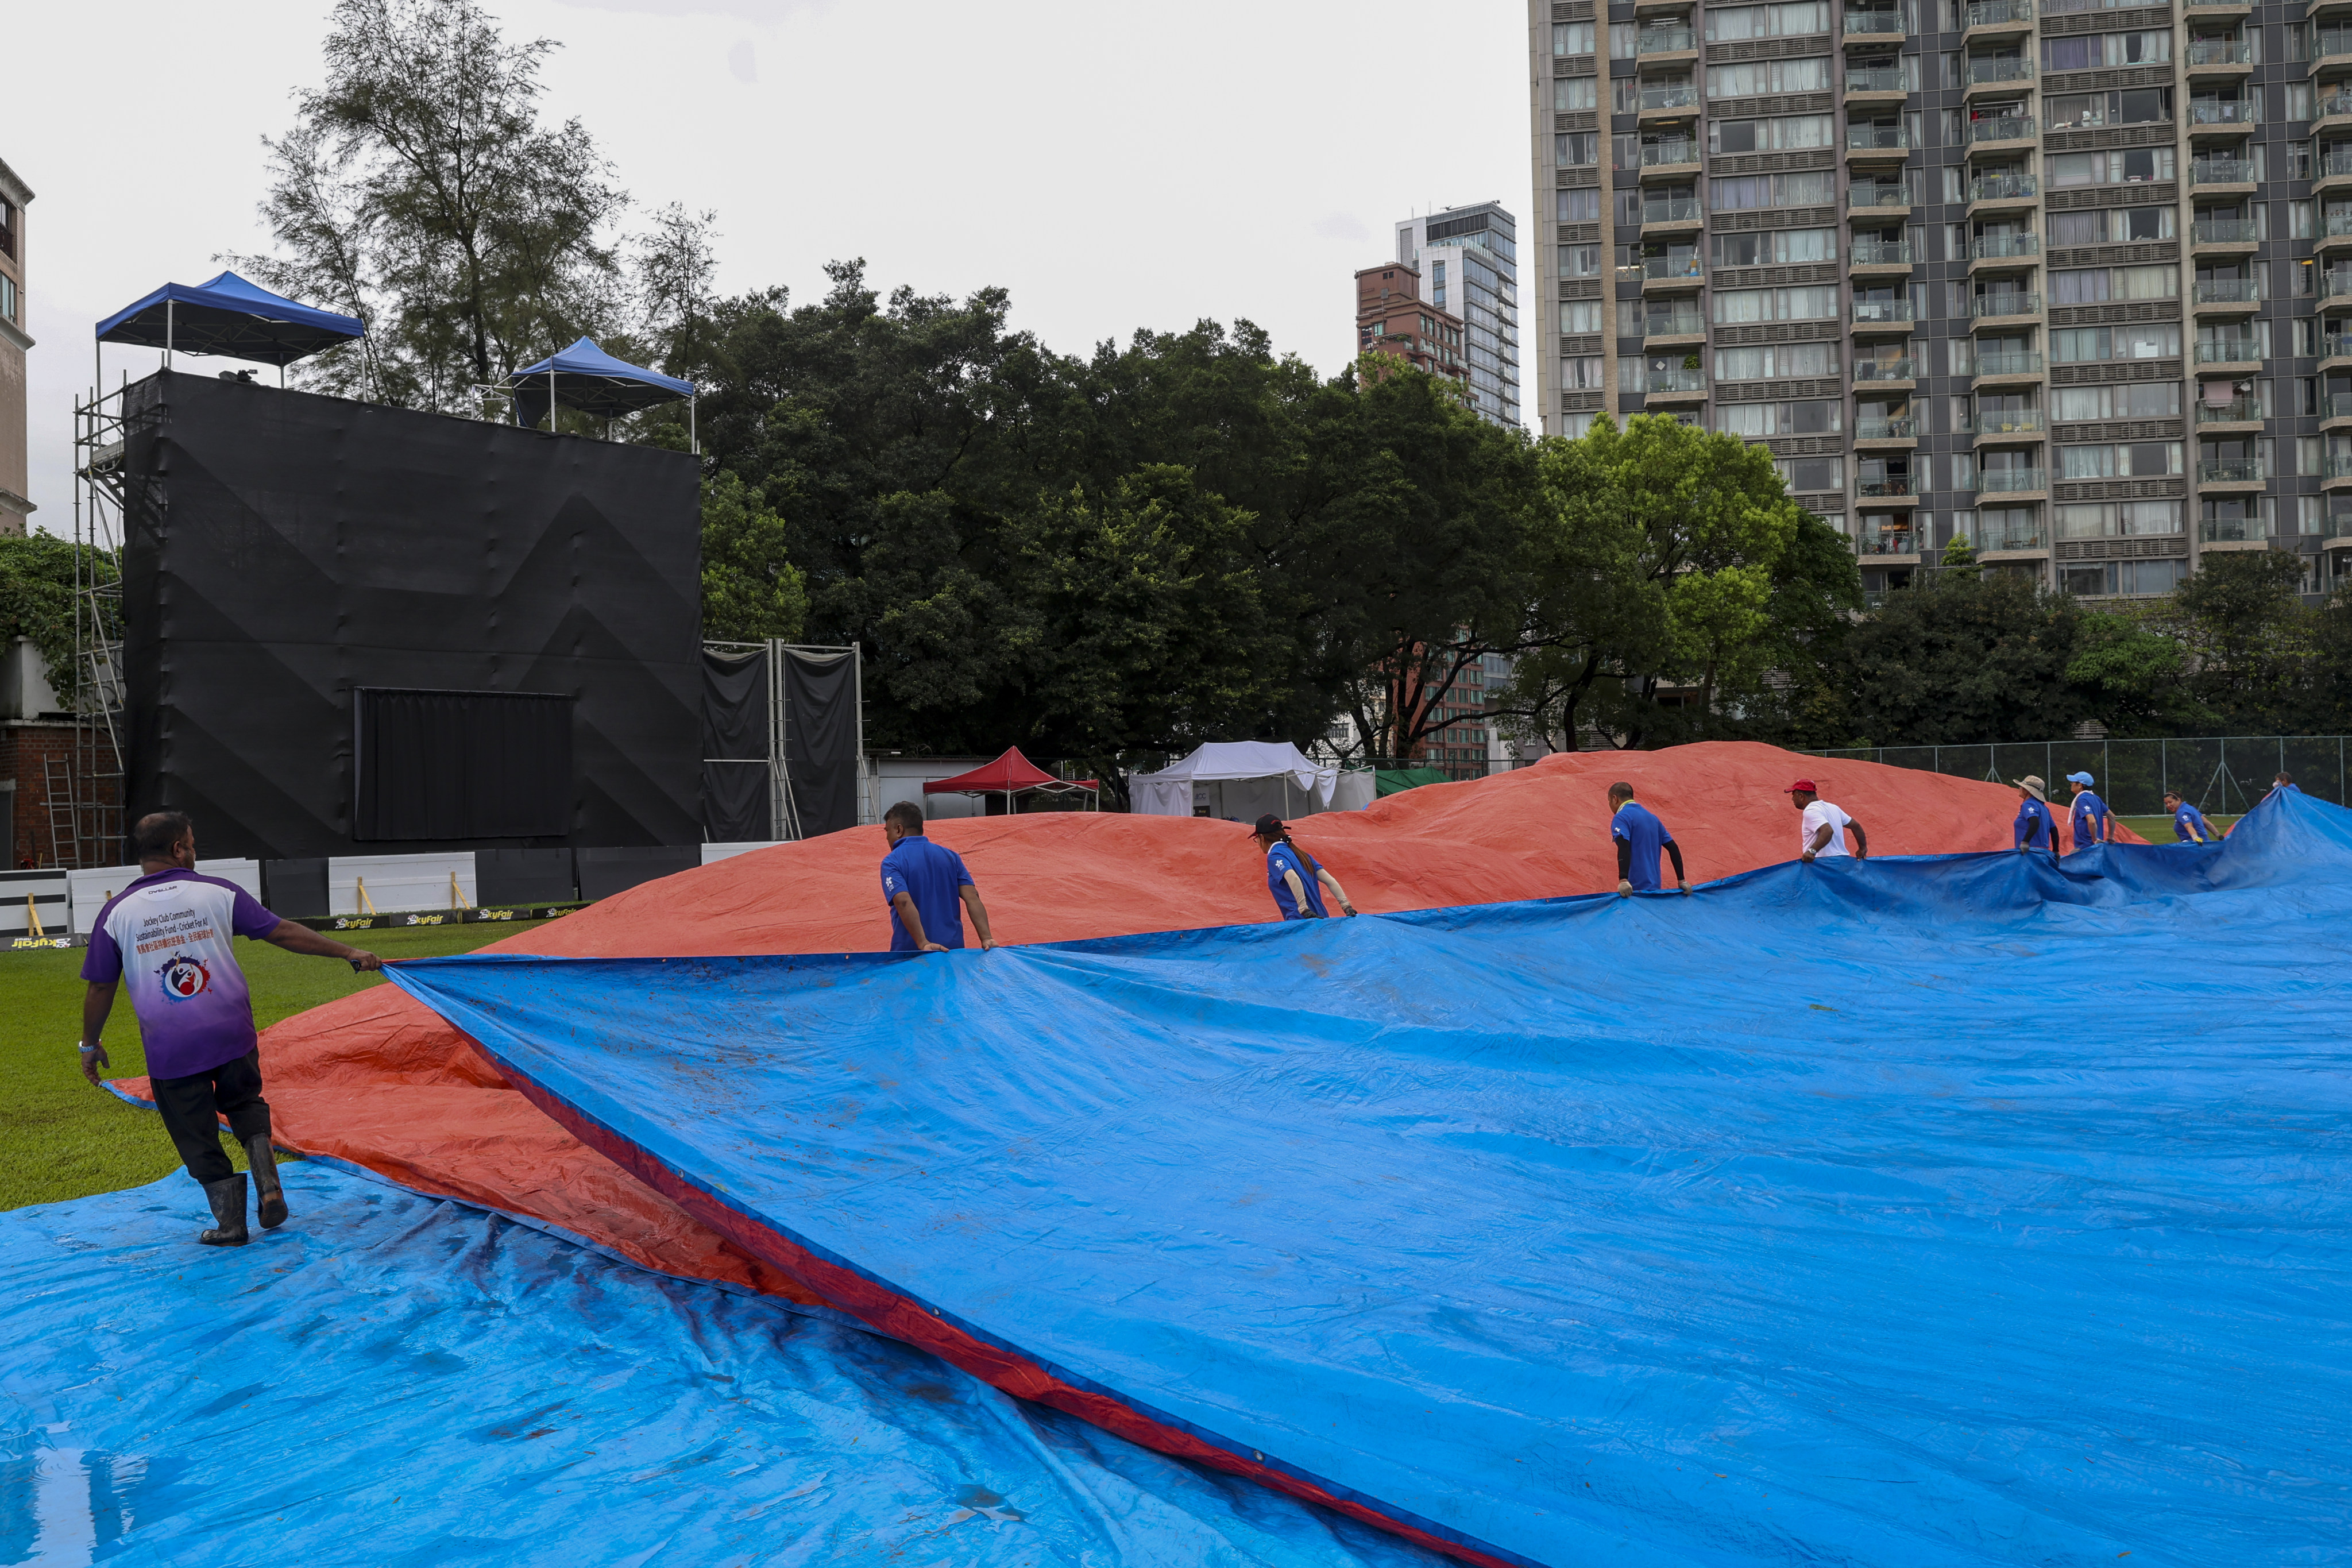 The covers are brought on to protect the pitch from the downpour as matches are disrupted at Tin Kwong Road Recreation Ground. Photo: Yik Yeung-man